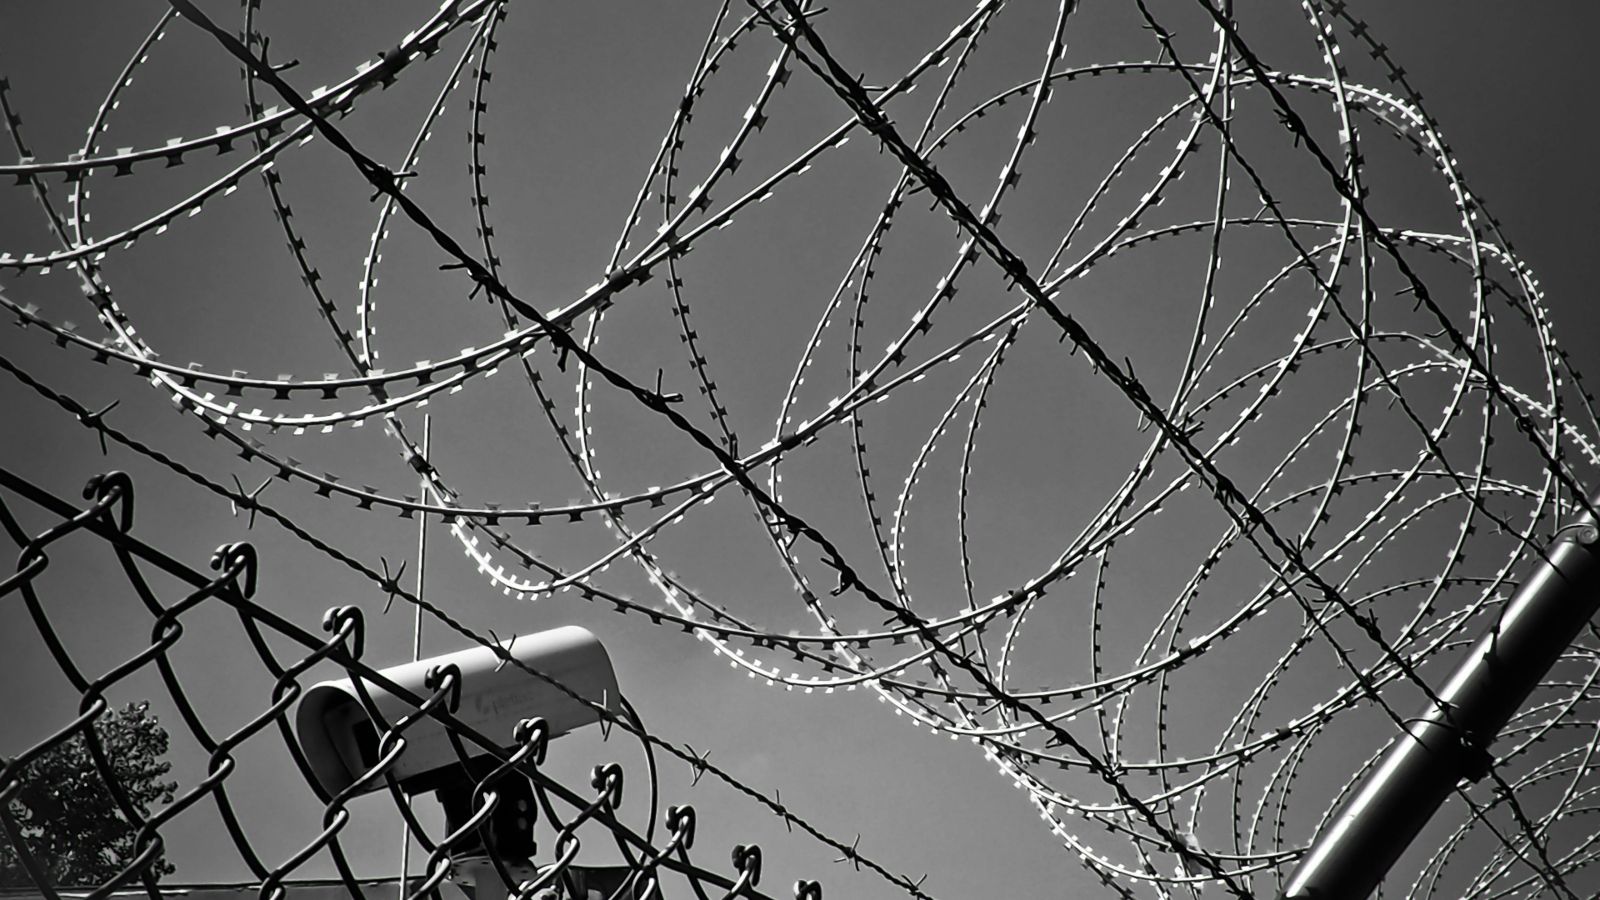 Grayscale photo of barbed wire fence 